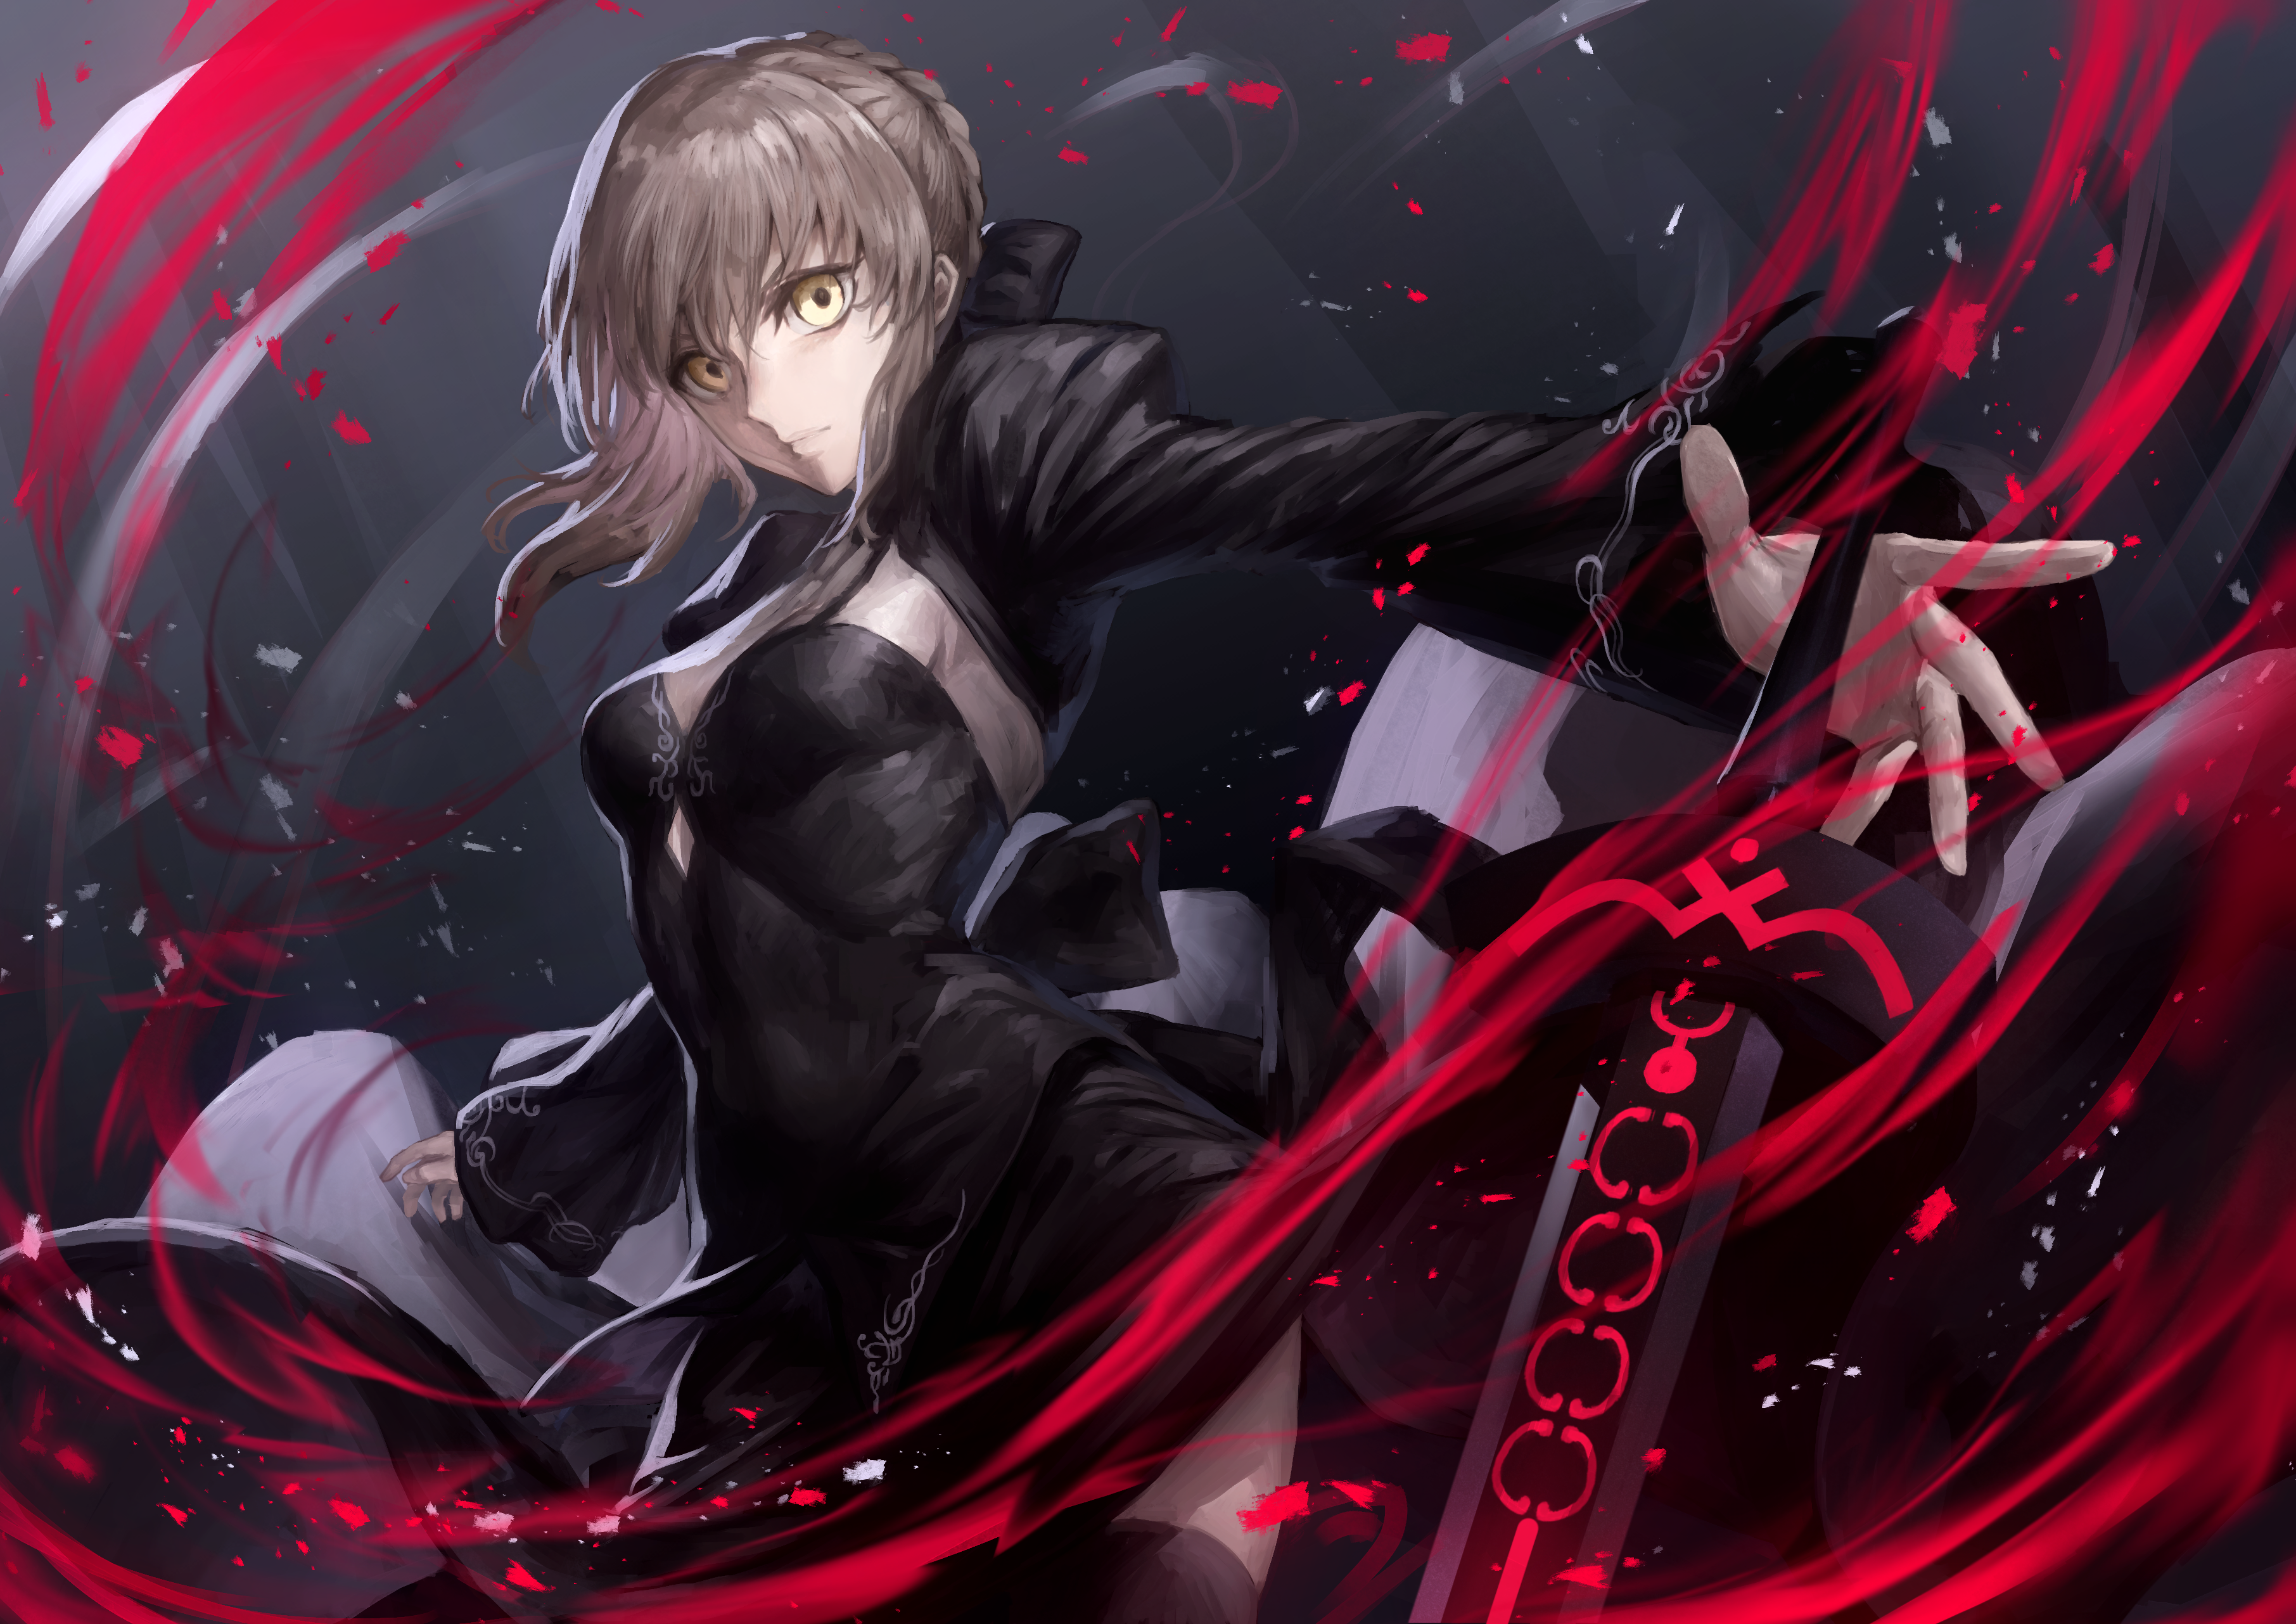 Anime Girls Anime Fate Grand Order Saber Alter Peperon Fate Stay Night Fate Stay Night Heavens Feel Wallpaper Resolution 3624x2563 Id Wallha Com